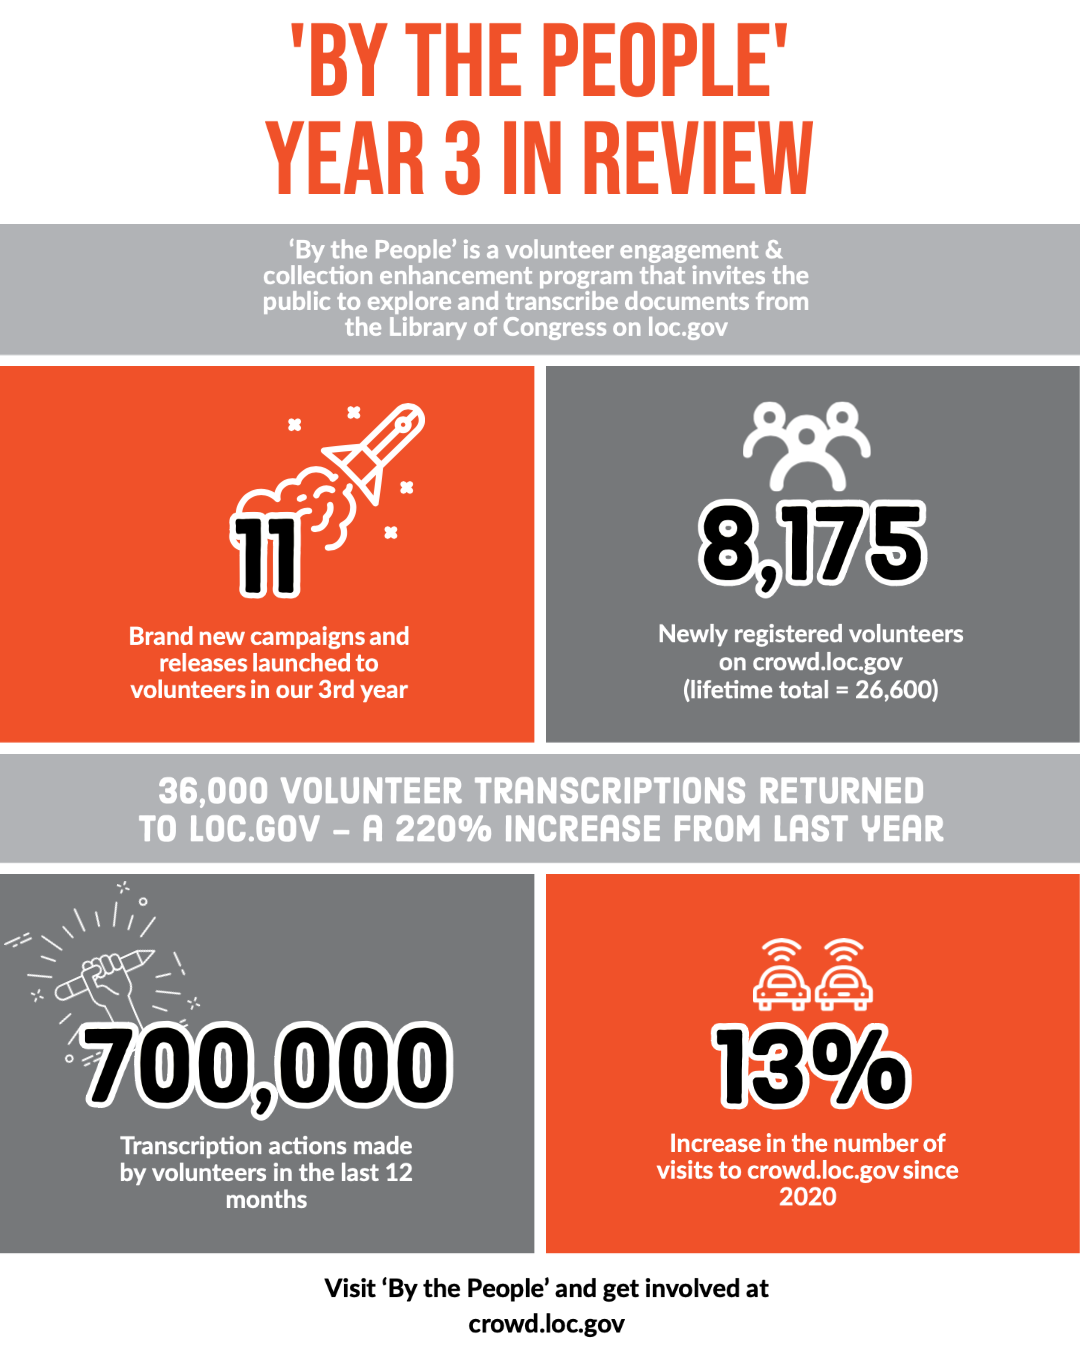 By the People "year 3 in review" infographic. Data included - 11 new campaigns or additions; 8,175 new volunteers; 36,000 transcriptions published to loc.gov; 700,000 actions by volunteers; 13% increase in the number of visits to crowd.loc.gov